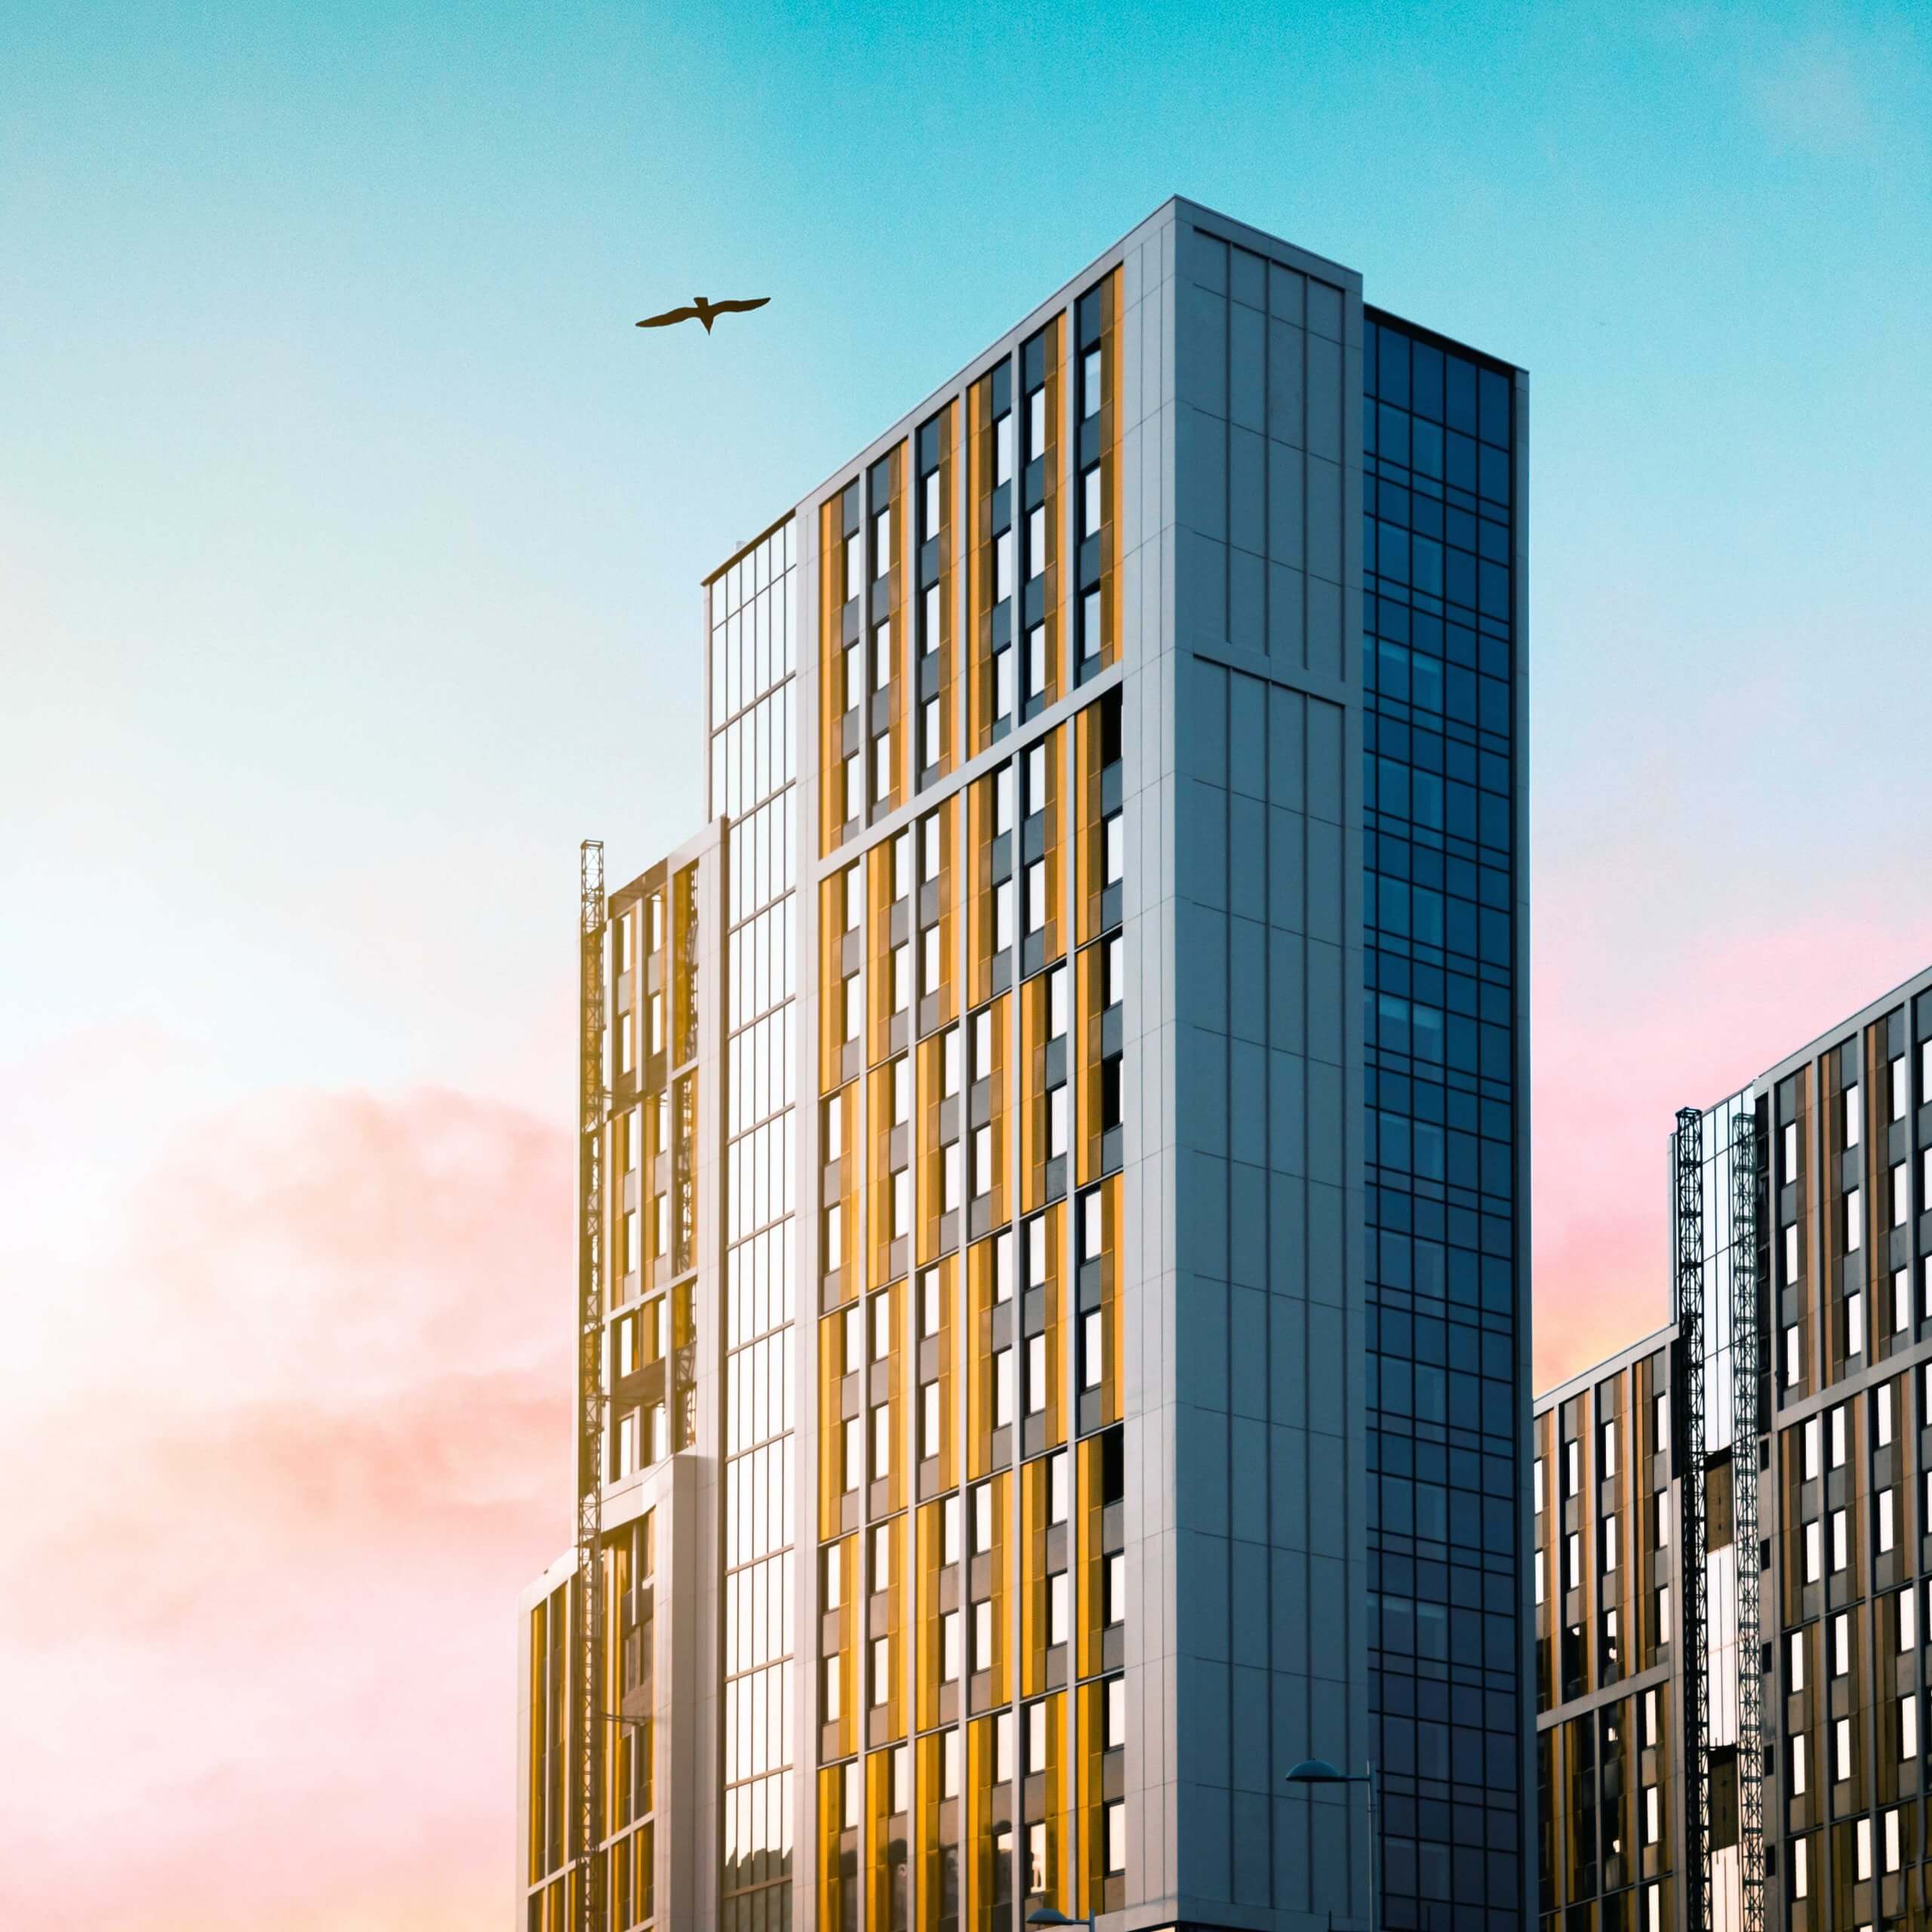 An image of a set of apartment blocks in a sunset, a bird flies overhead. A visual metaphor for the topic of this webinar The New Building Gateways: January follow up